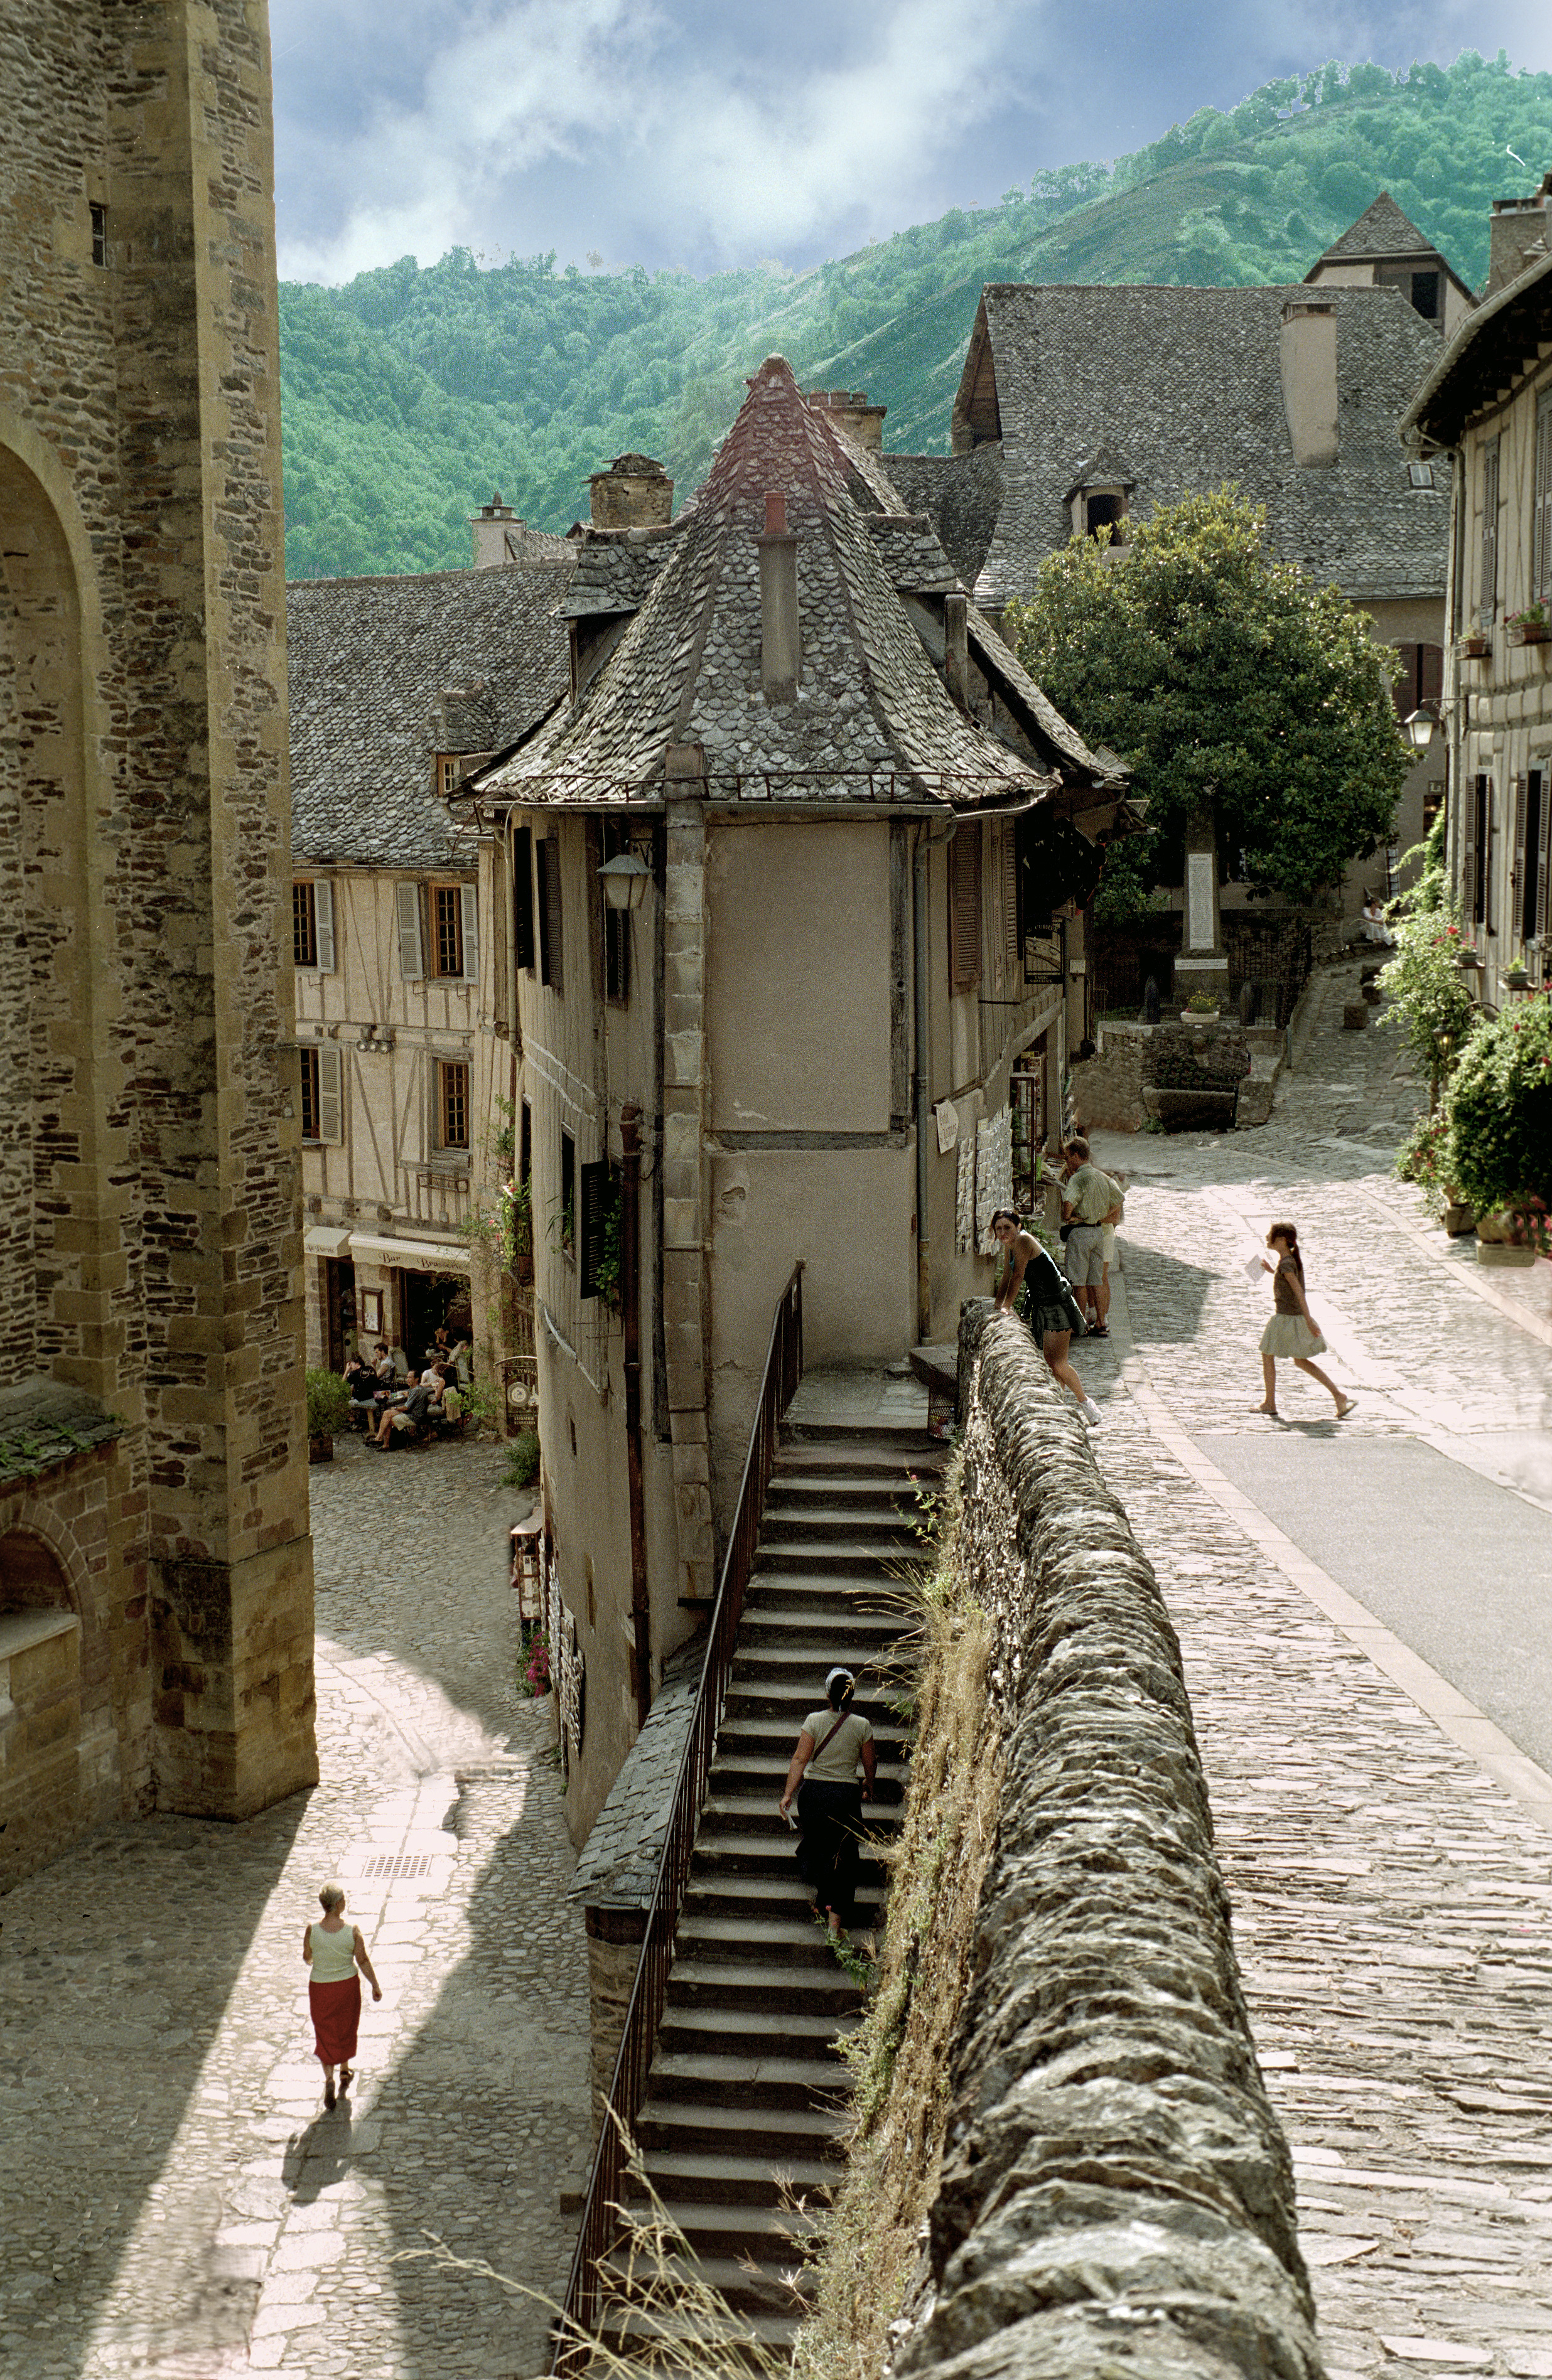 The village of Conques in France